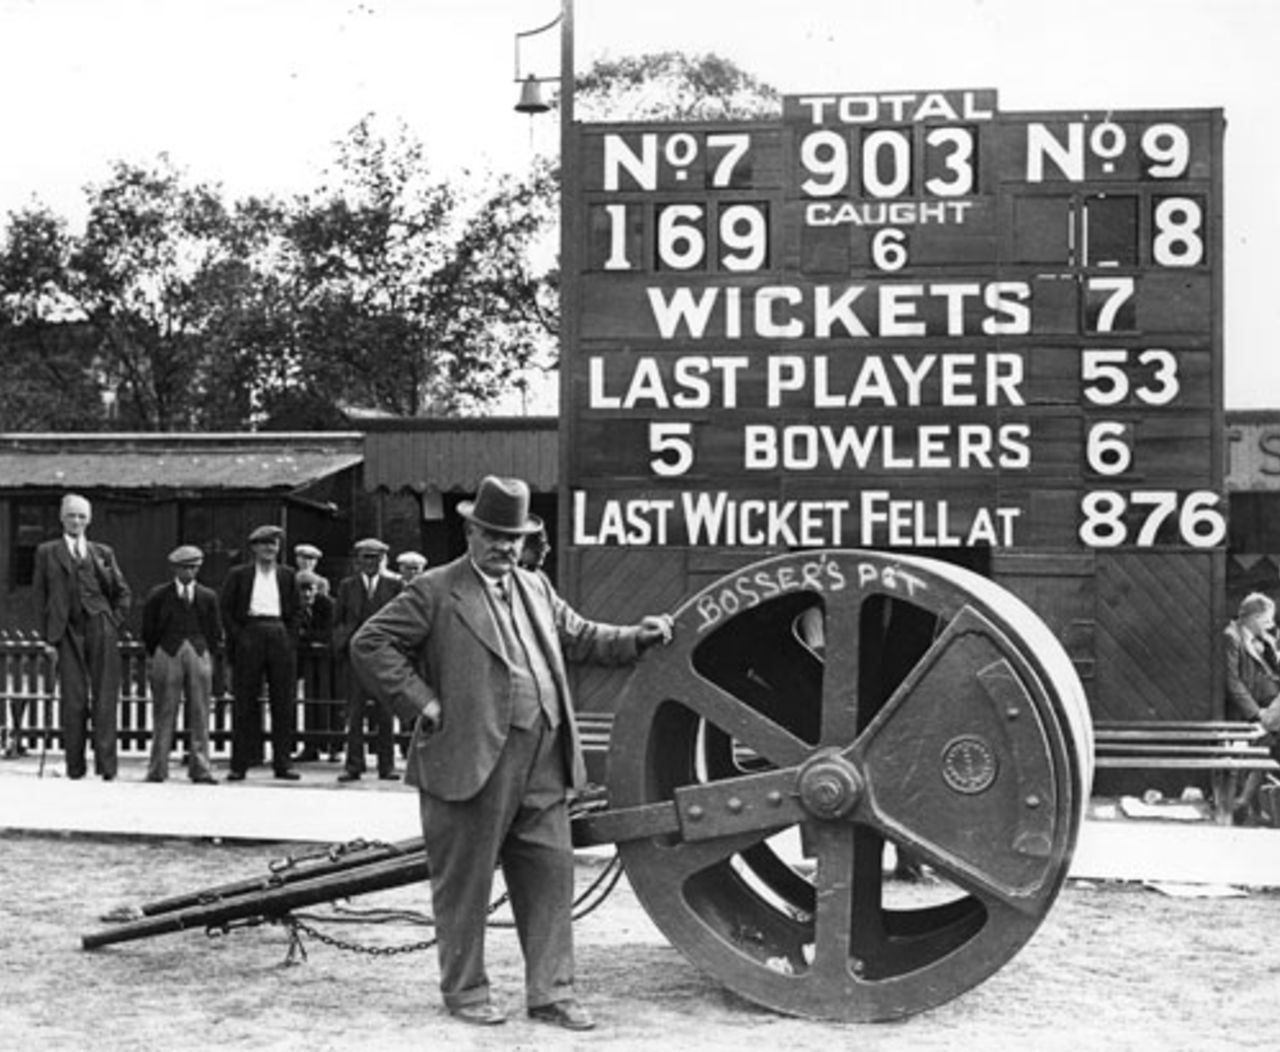 Oval groundsman Bosser Martin with his heavy roller at the end of the 1938 Test which England won by an innings and 579 runs.  The endless rolling by what was known as "Bosser's Pet" helped turn the Oval pitch into a bowlers' graveyard, England v Australia, 5th Test, The Oval, August 24, 1938 